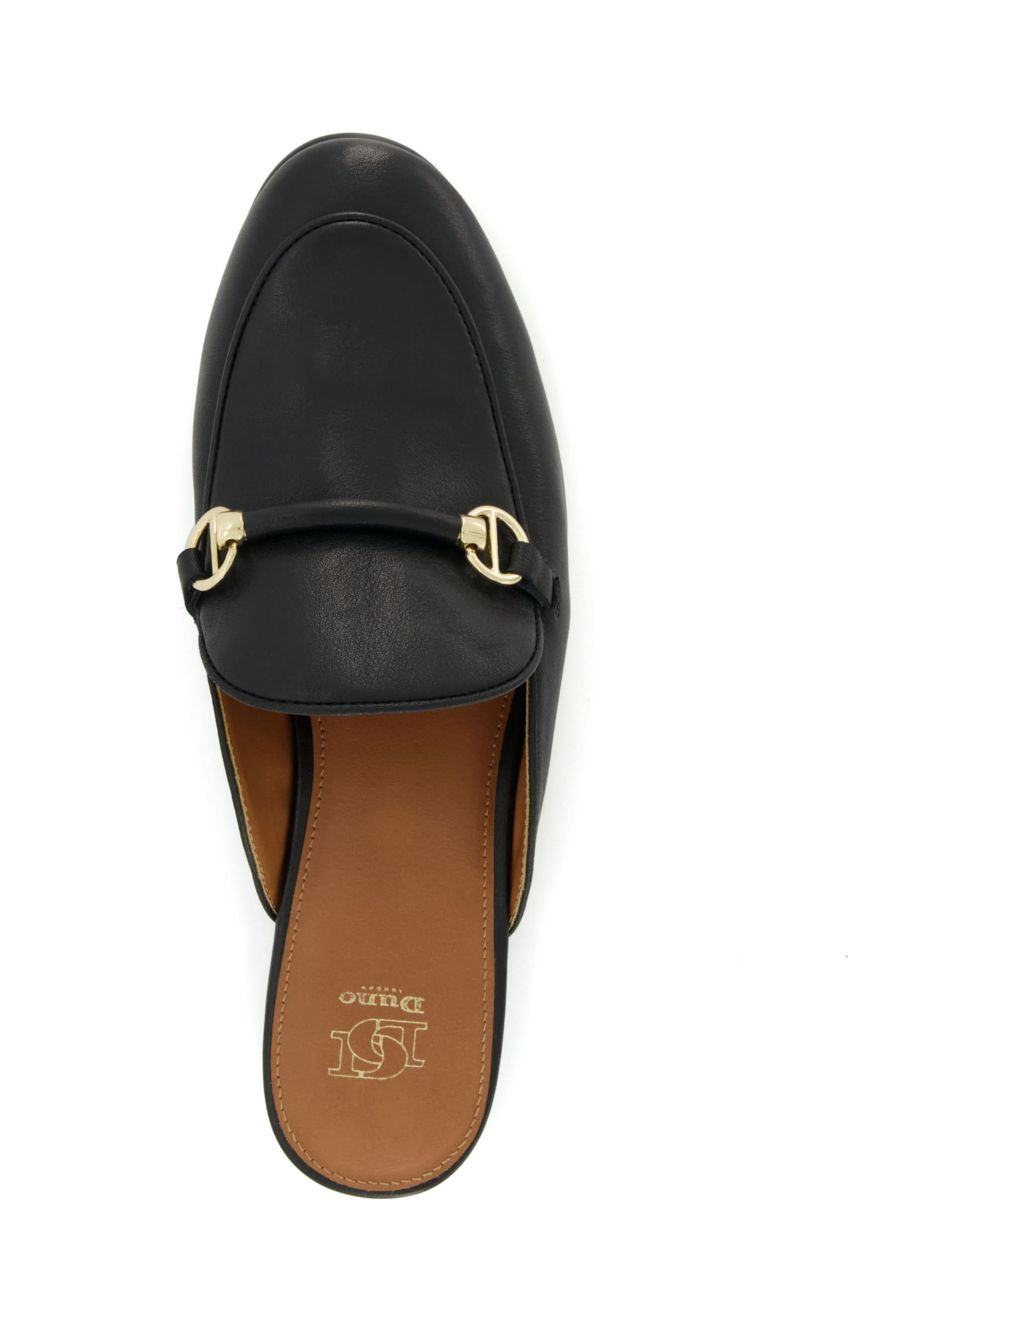 Leather Ring Detail Flat Loafers image 4